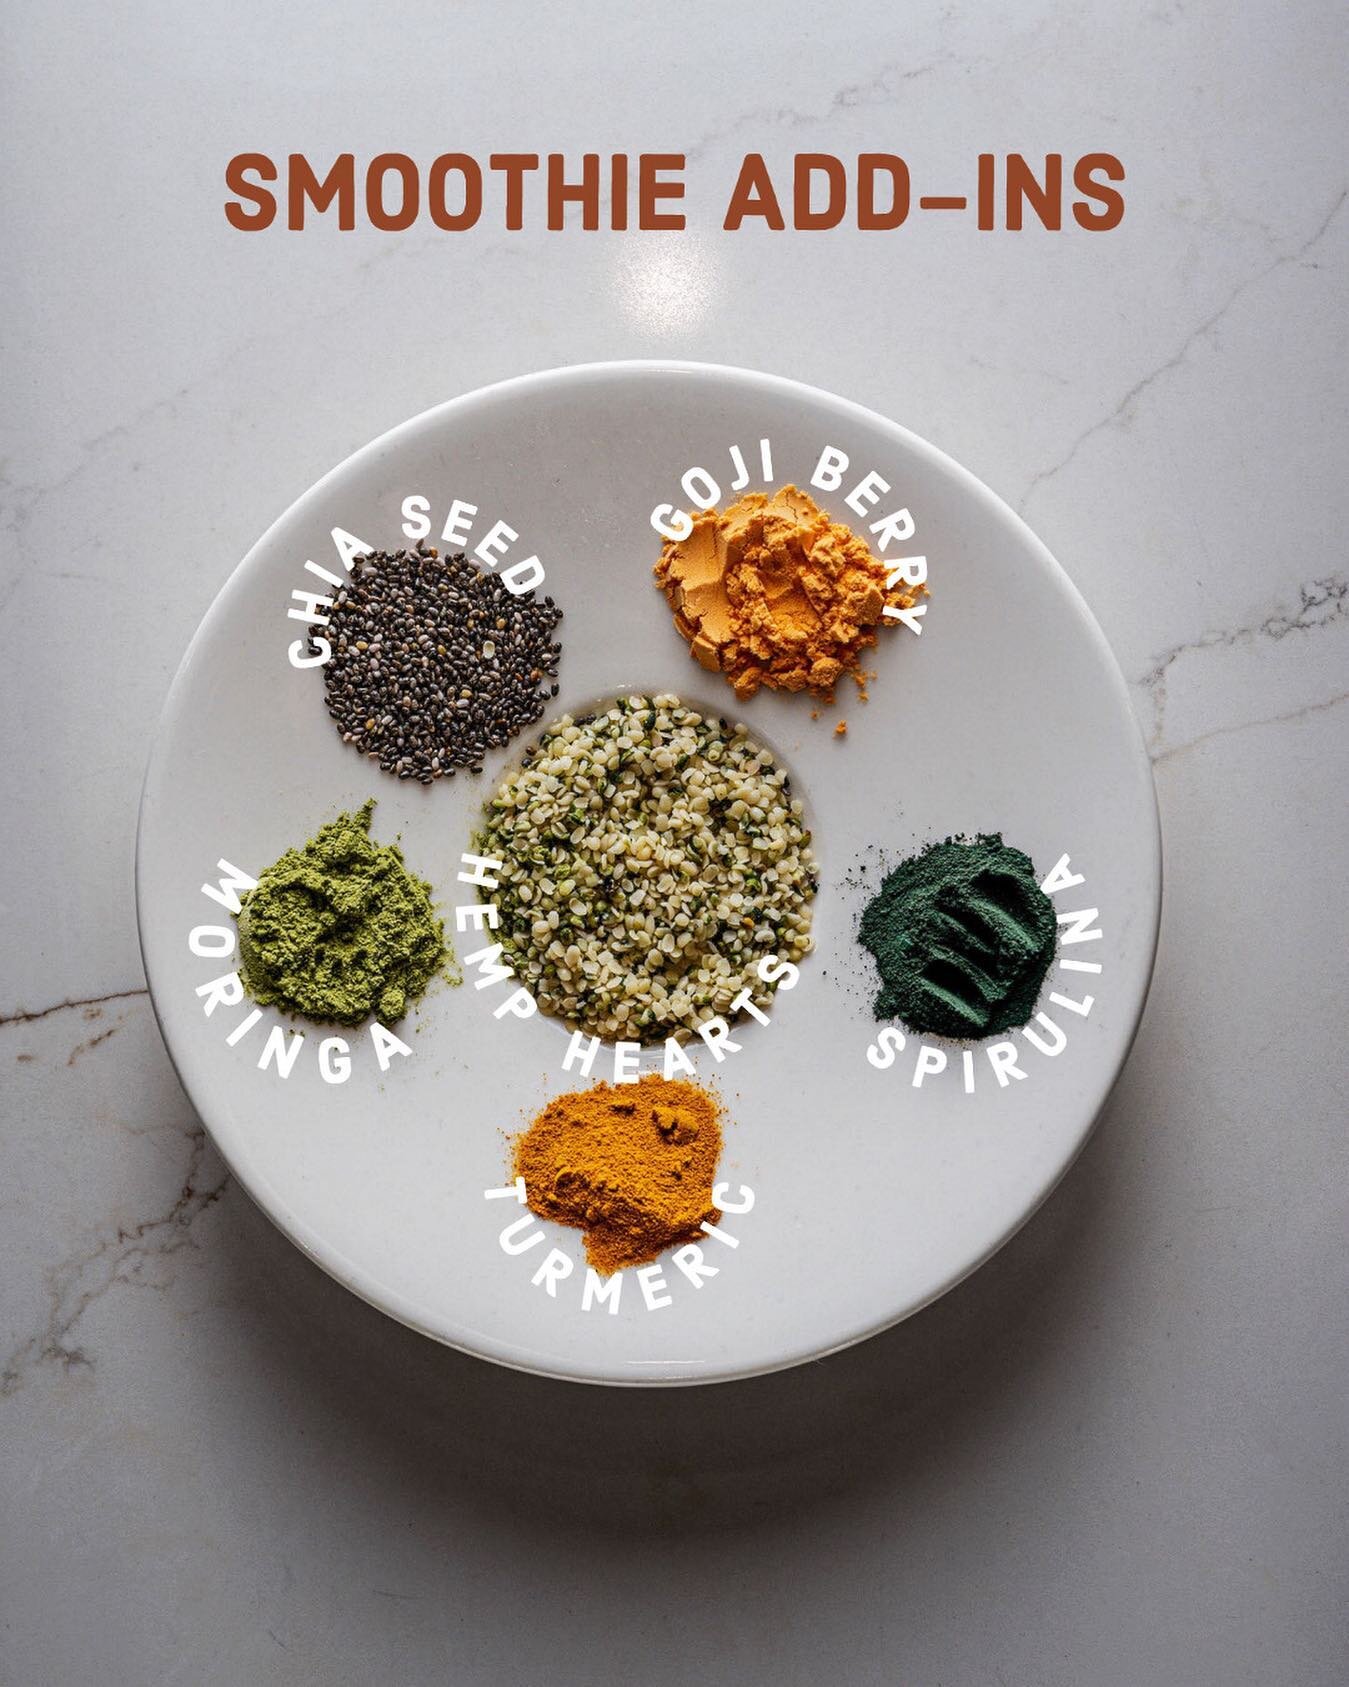 Give your smoothies a boost with one of our many add-ins! Benefits range from antioxidant properties from the turmeric to reducing blood sugar from the moringa. Each one of our add-ins carry powerful benefits guaranteed to give your afternoon pick me